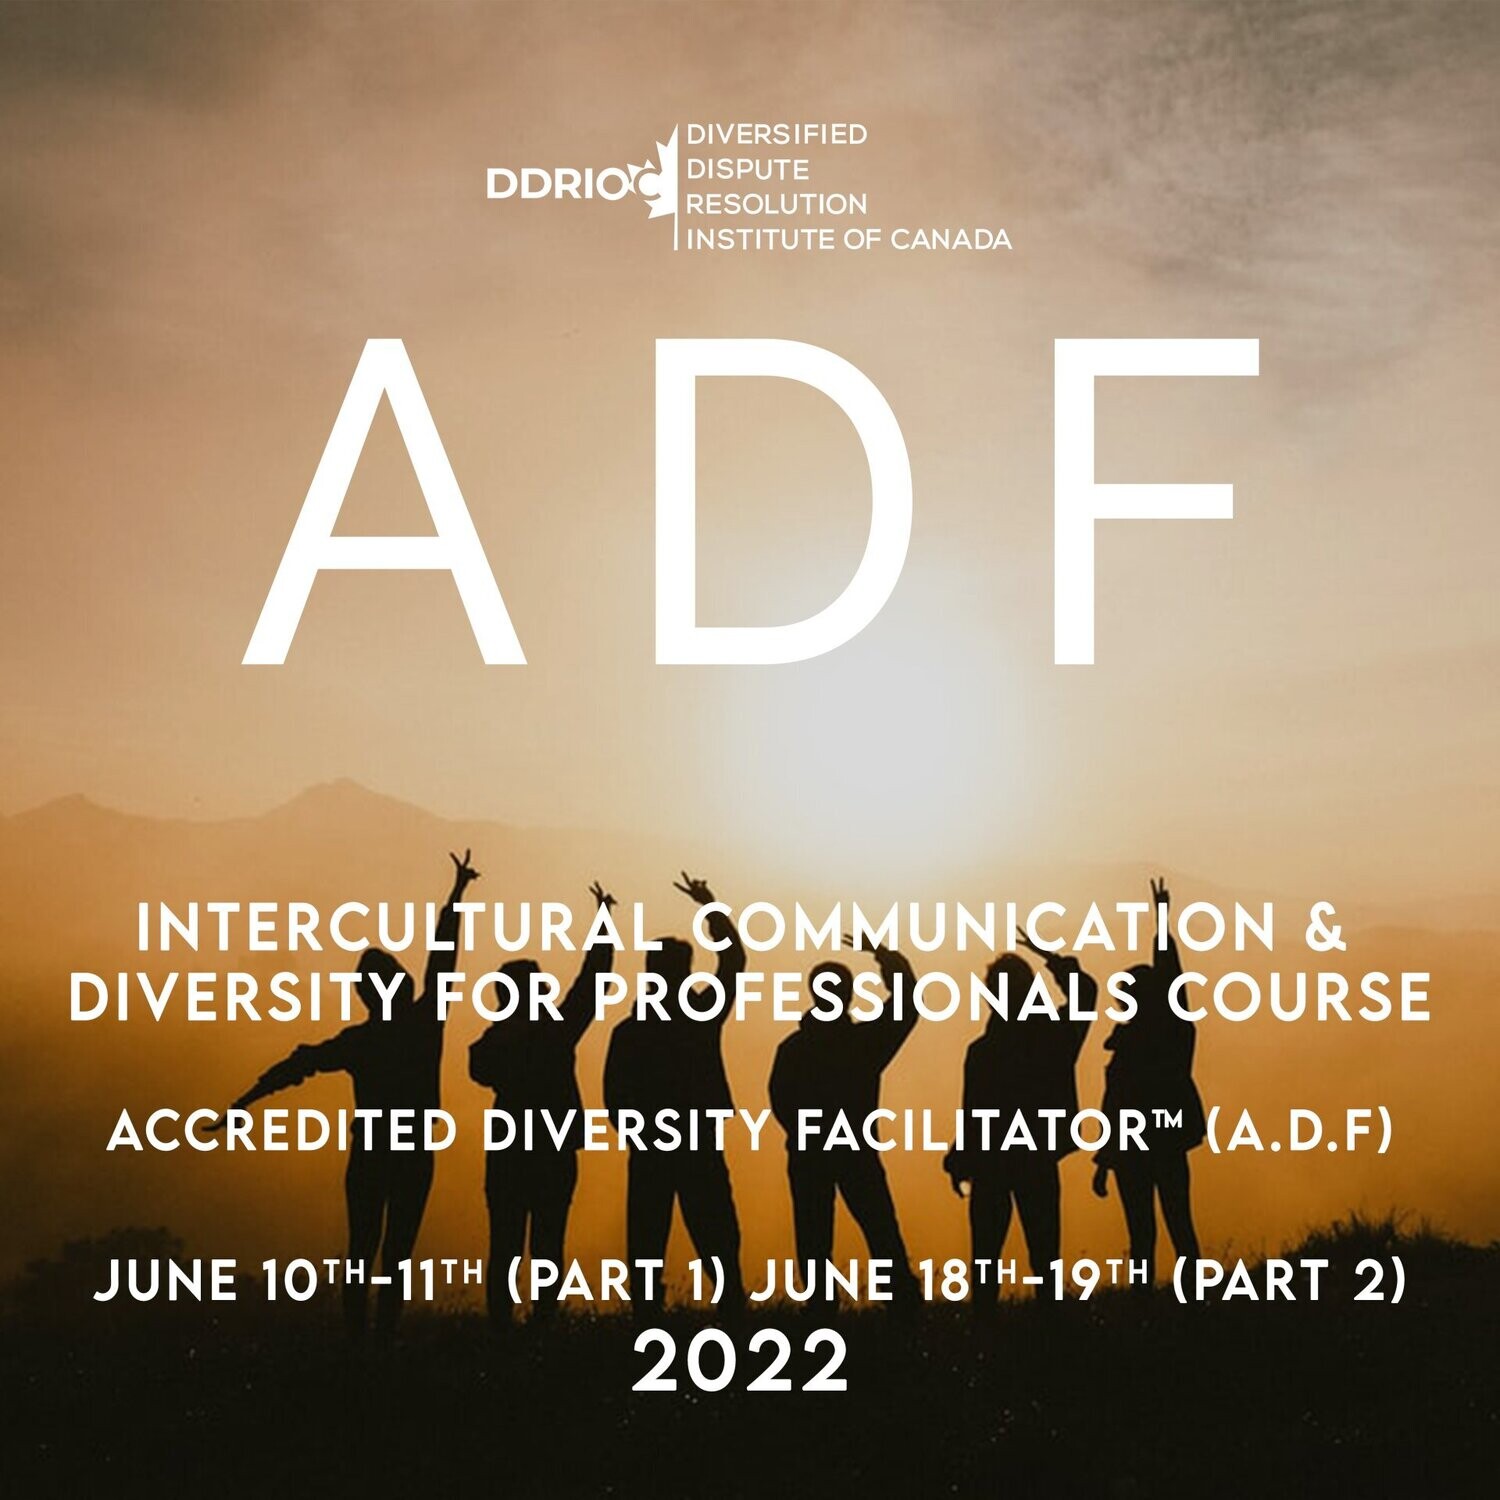 Intercultural Communication & Diversity for Professionals Course - Accredited Diversity Facilitator (A.D.F) Certification - June 10th-11th (Part 1) & June 17th- 18th (Part 2) 2022